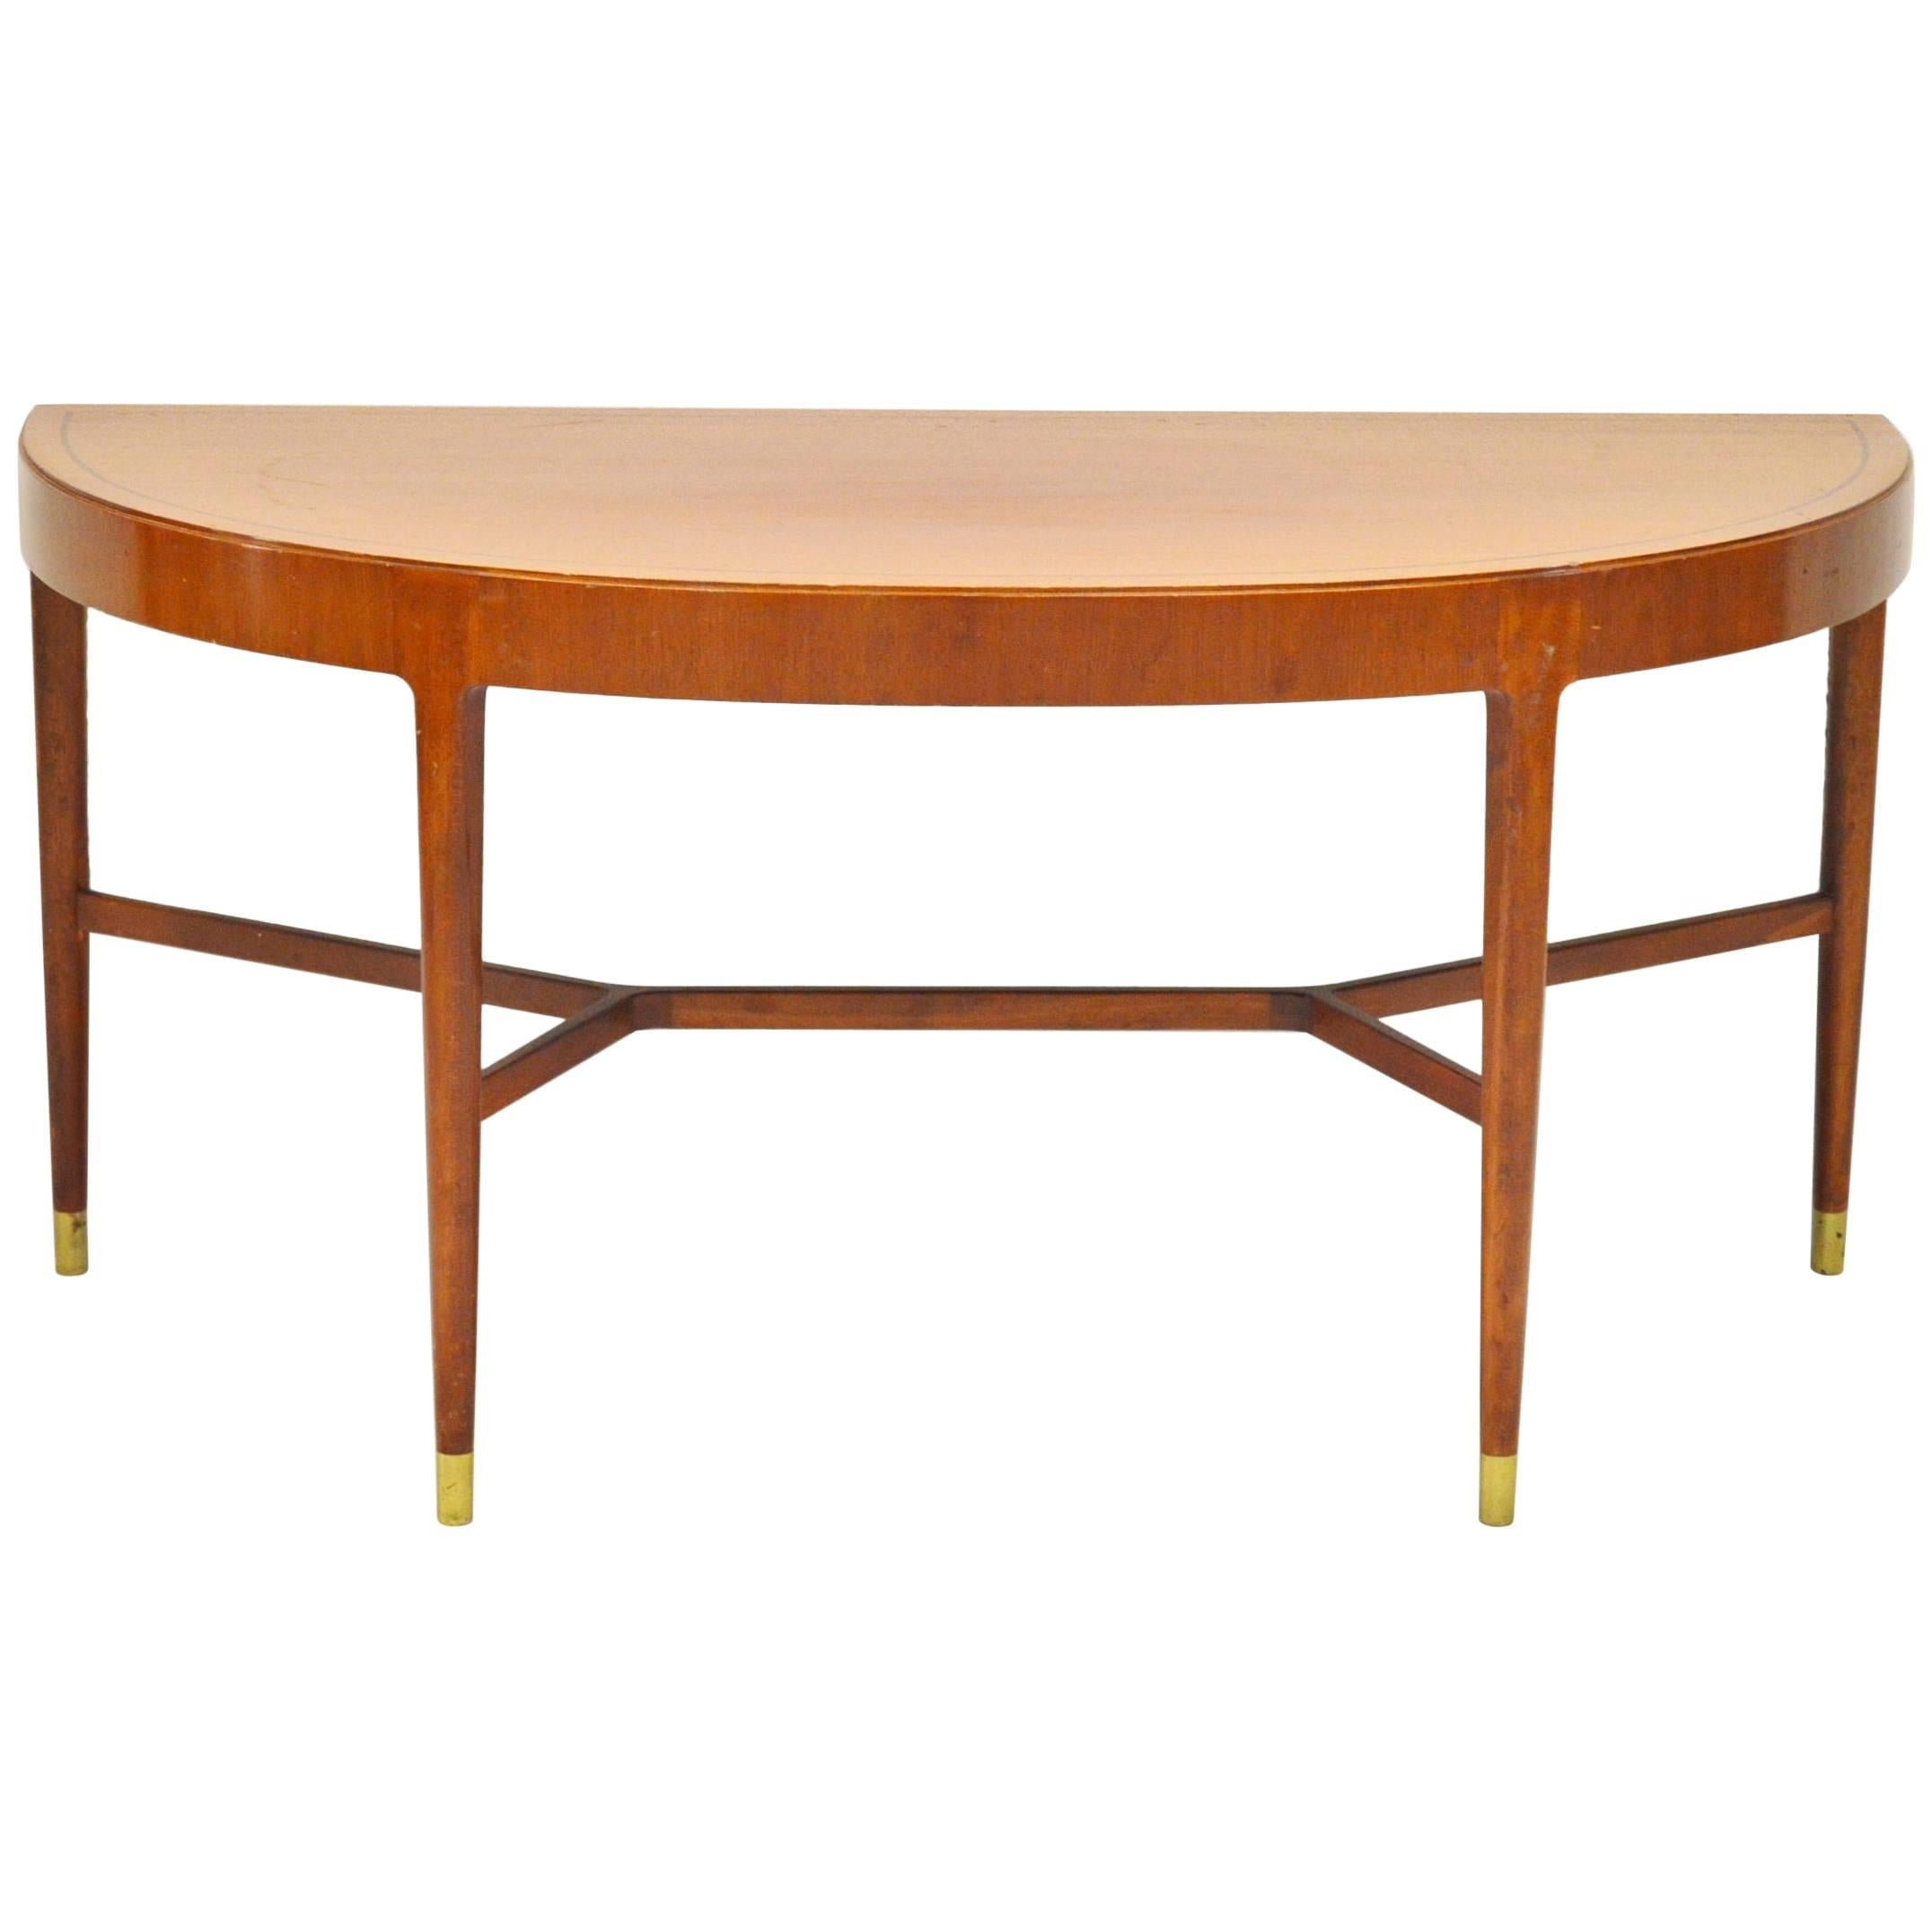 1950s Half Moon Mahogany Crescent or Console Table with Brass Fittings For Sale